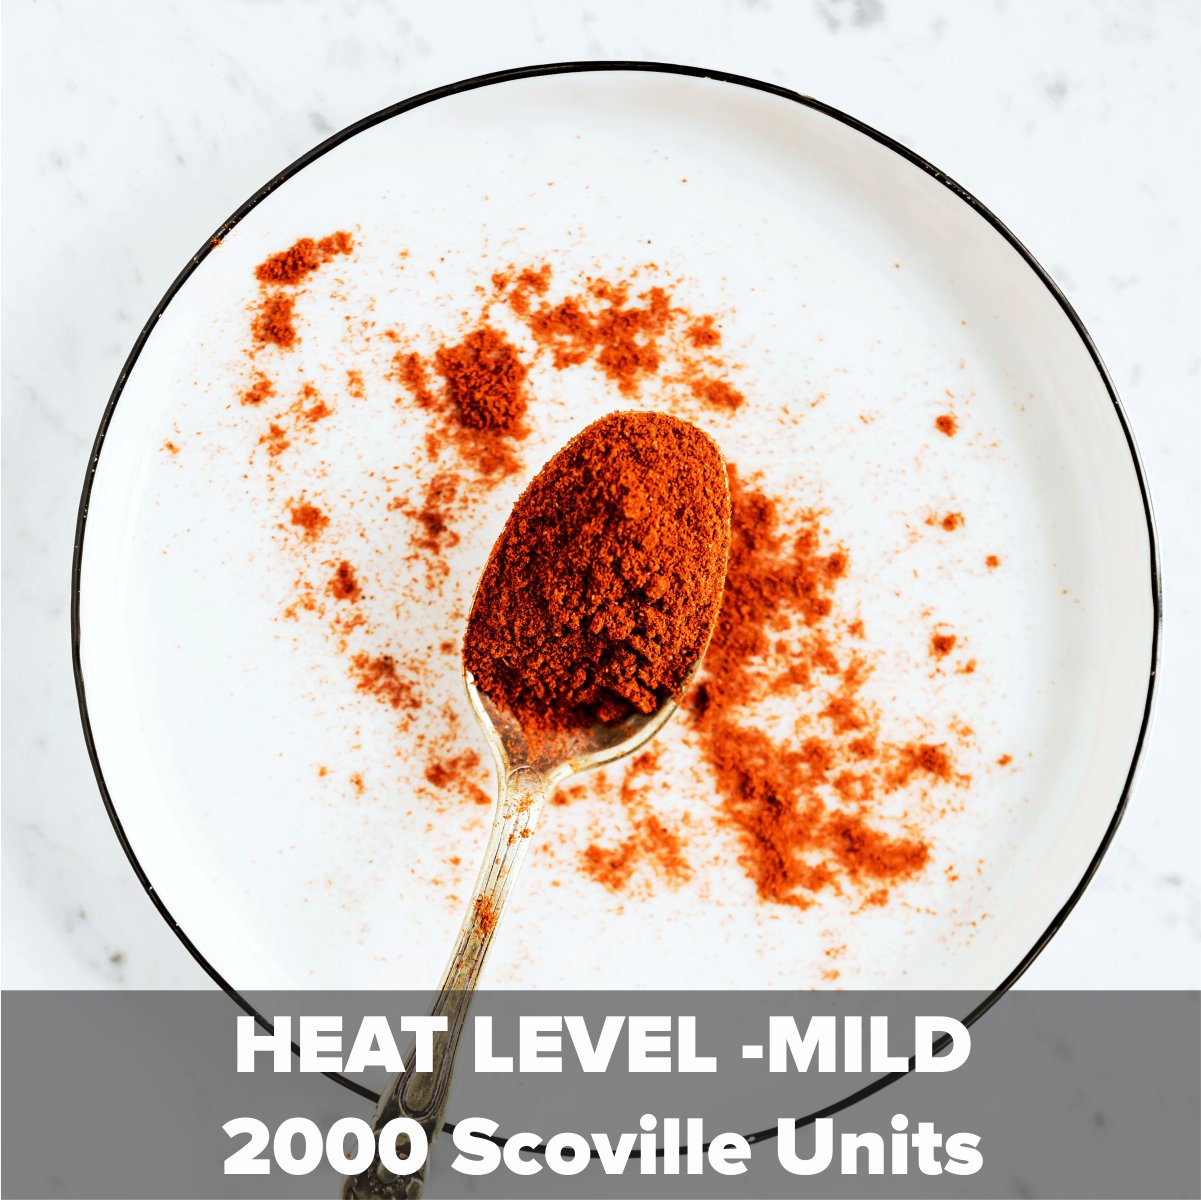 Smoked Paprika | Re-Sealable Zip-Pouch | 50g